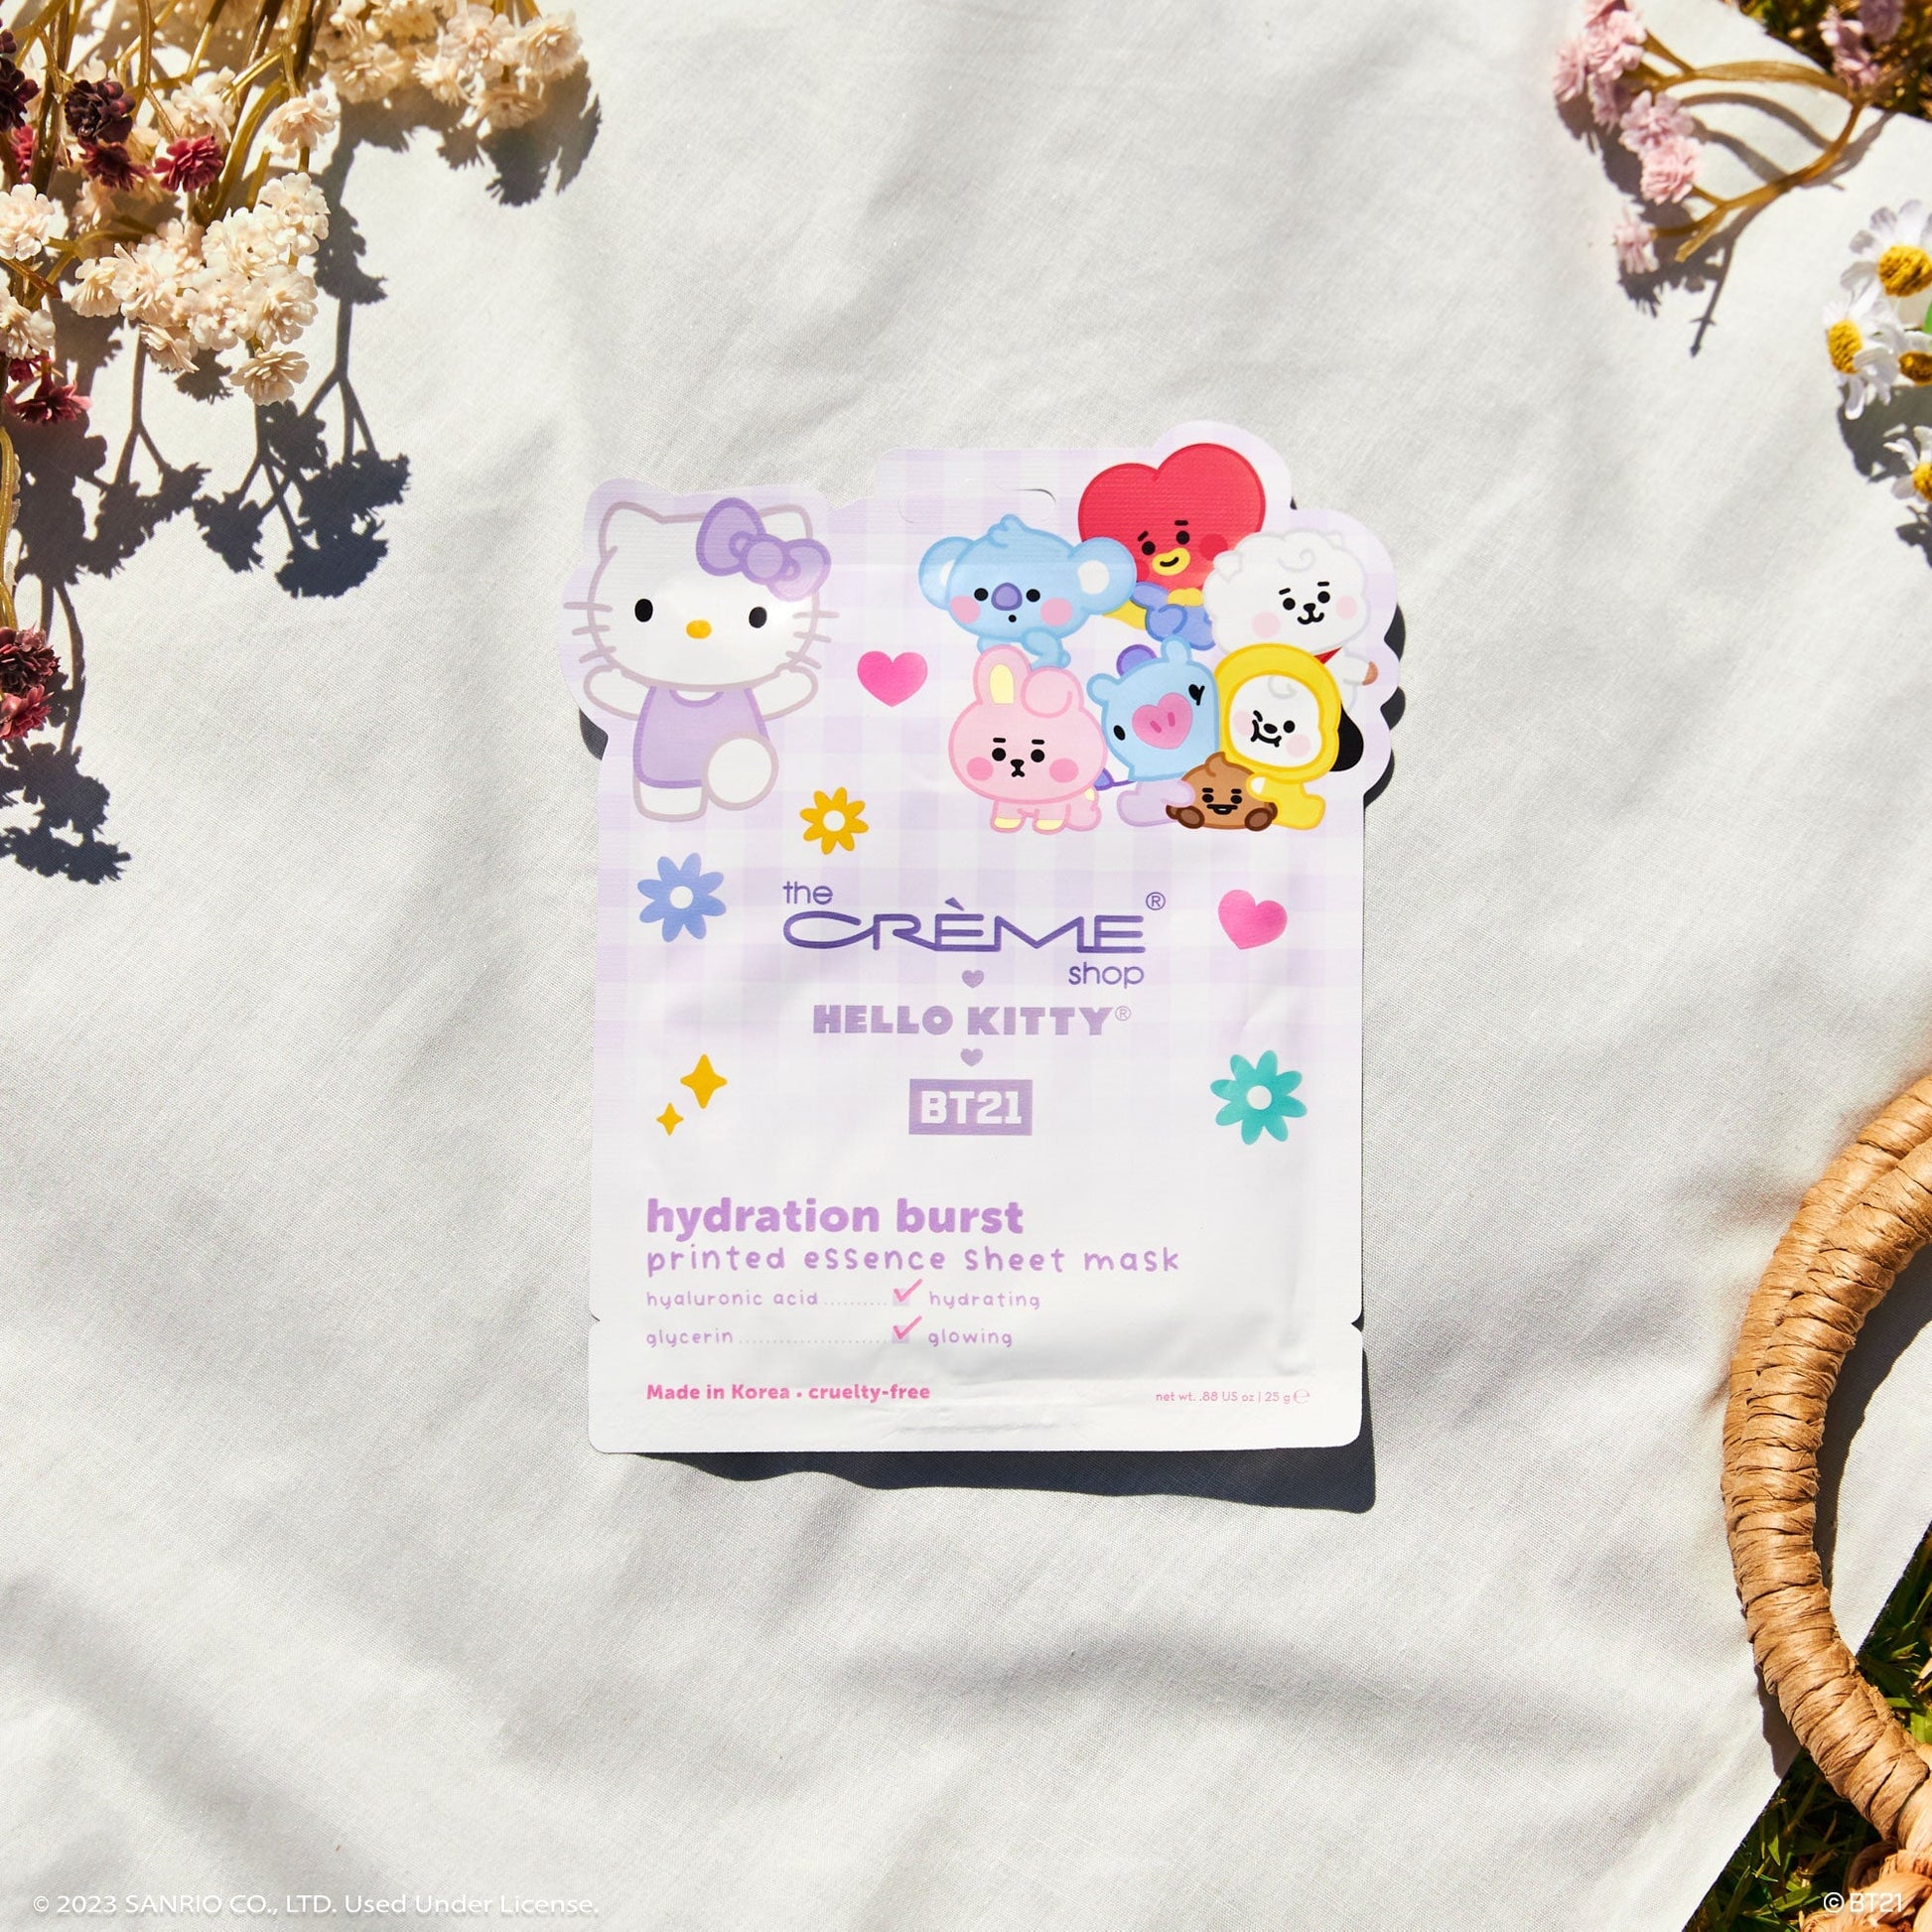 Hello Kitty & BT21 Hydration Burst Printed Essence Sheet Mask with Hyaluronic Acid and Glycerin, $4